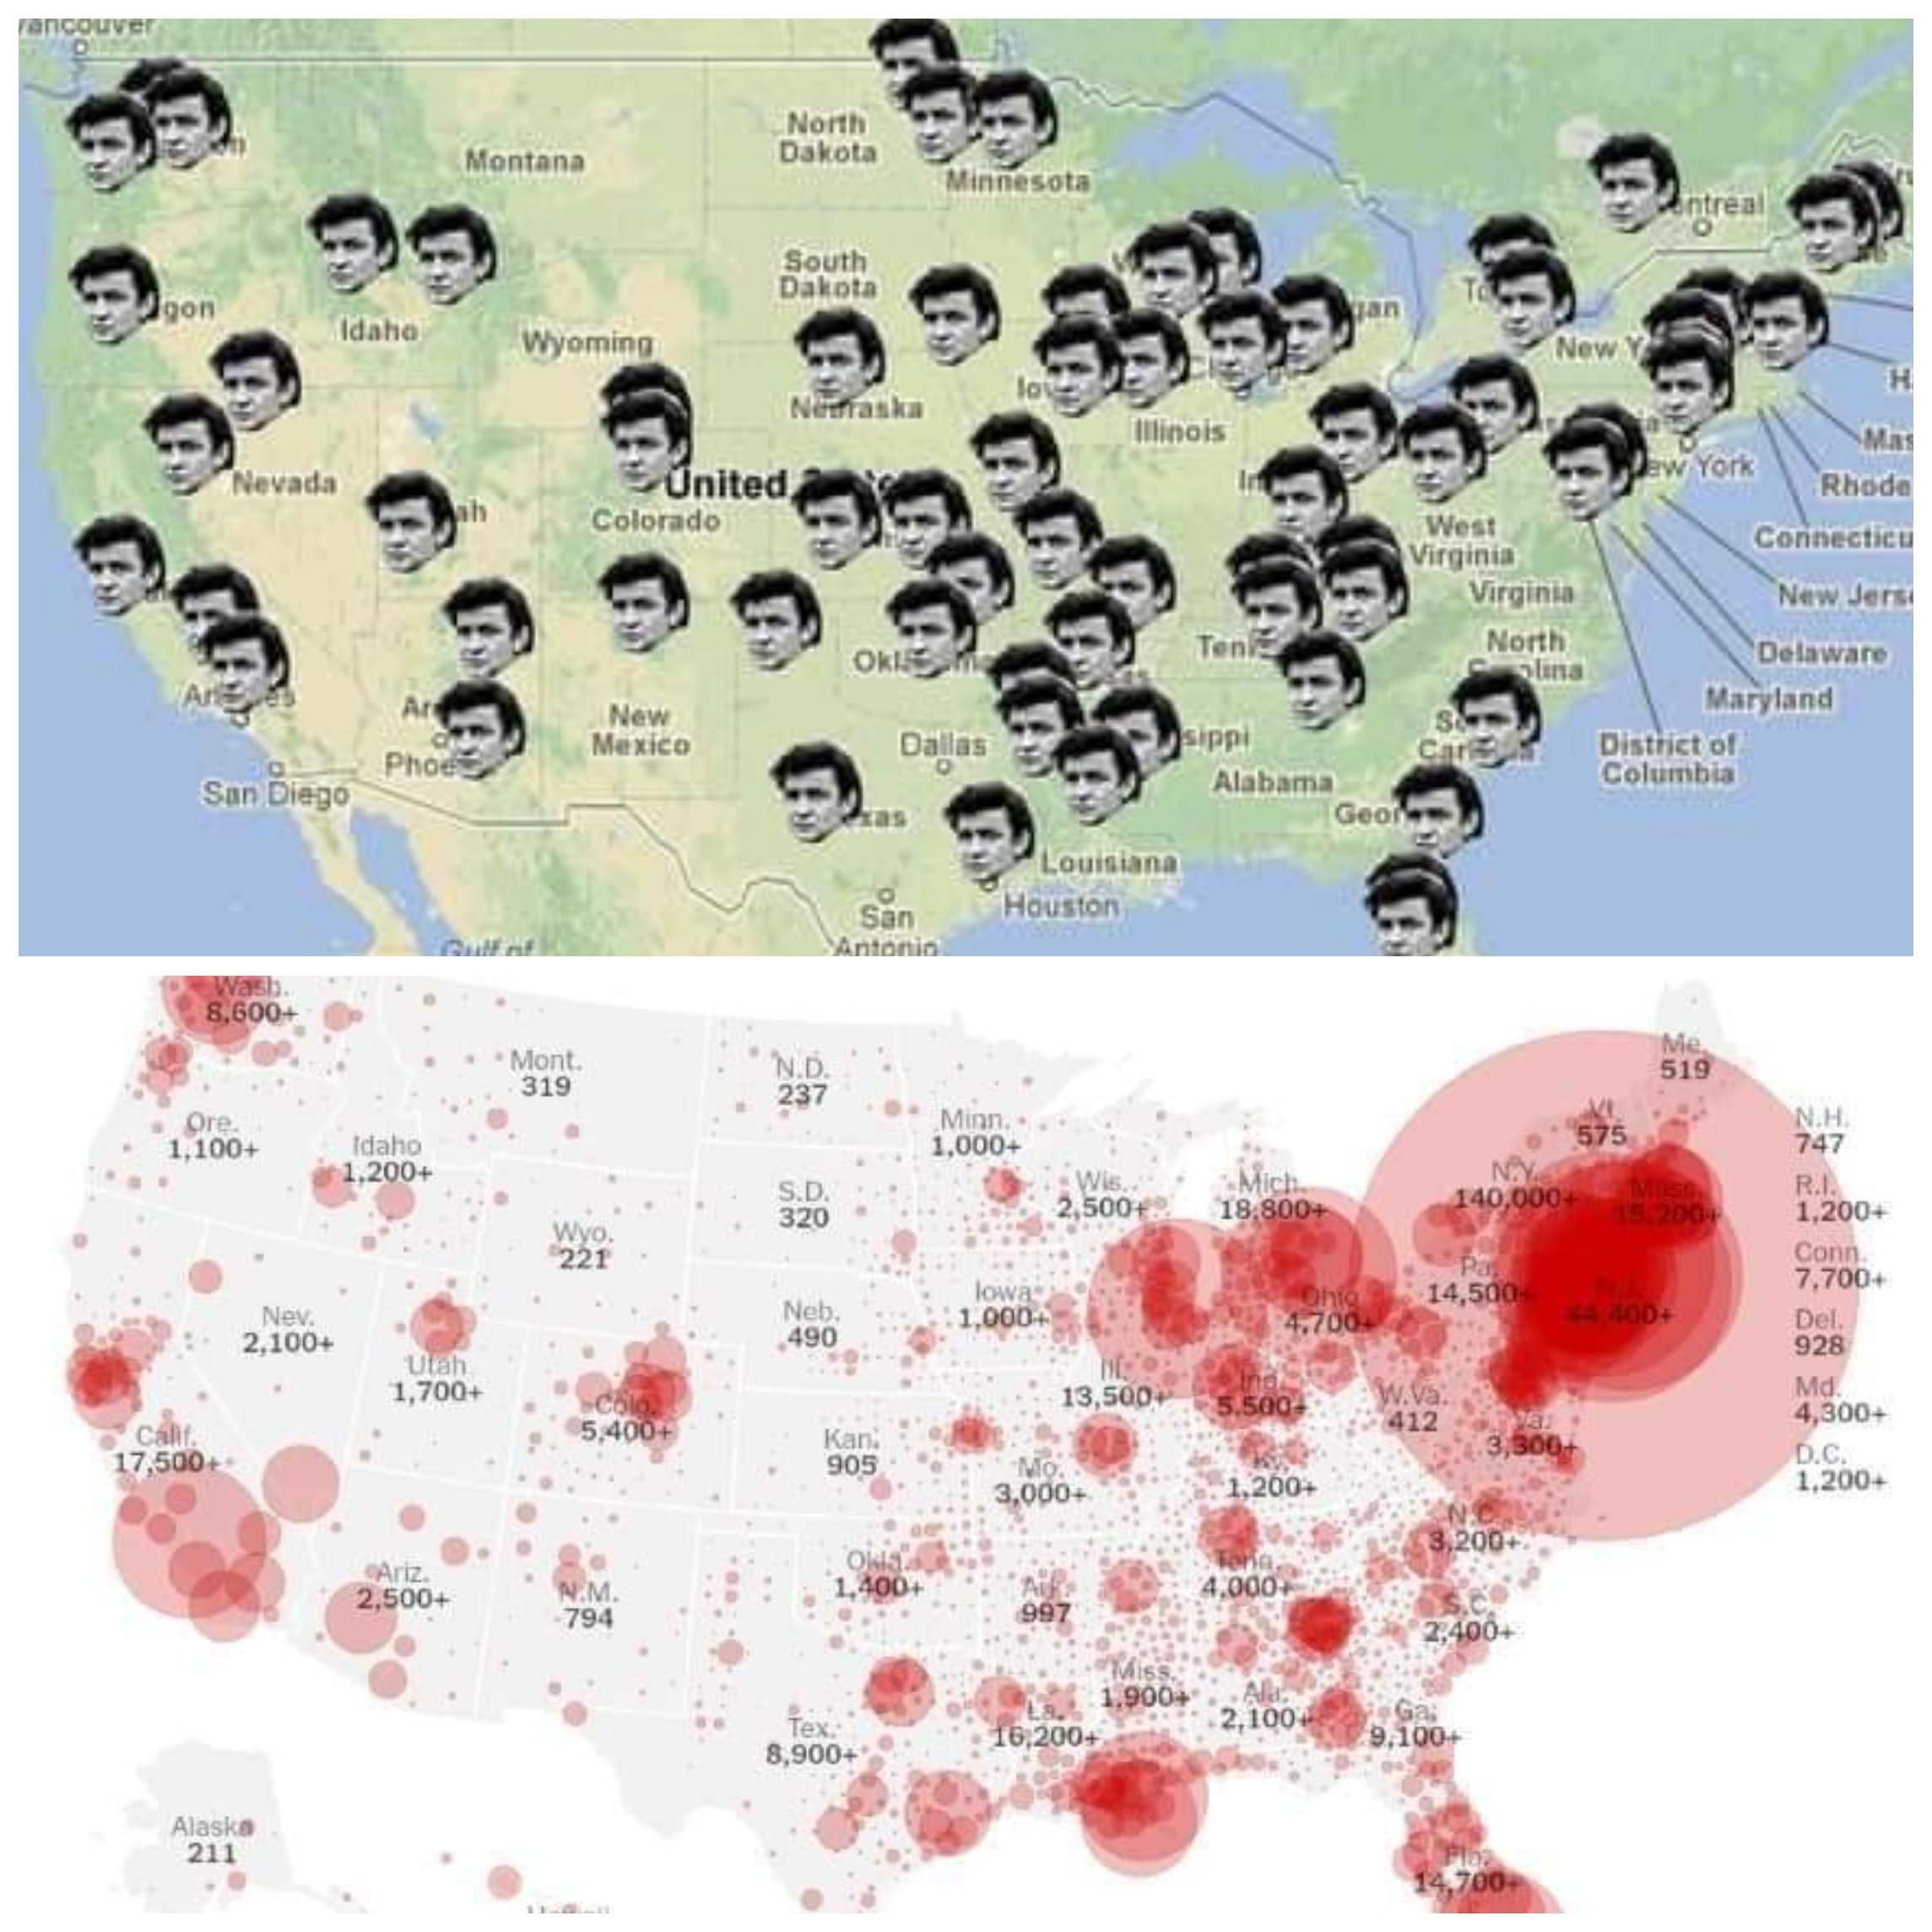 Places Johnny Cash claims to have been in the song "ive been everywhere" vs the Covid-19 spread map. Coincidence????